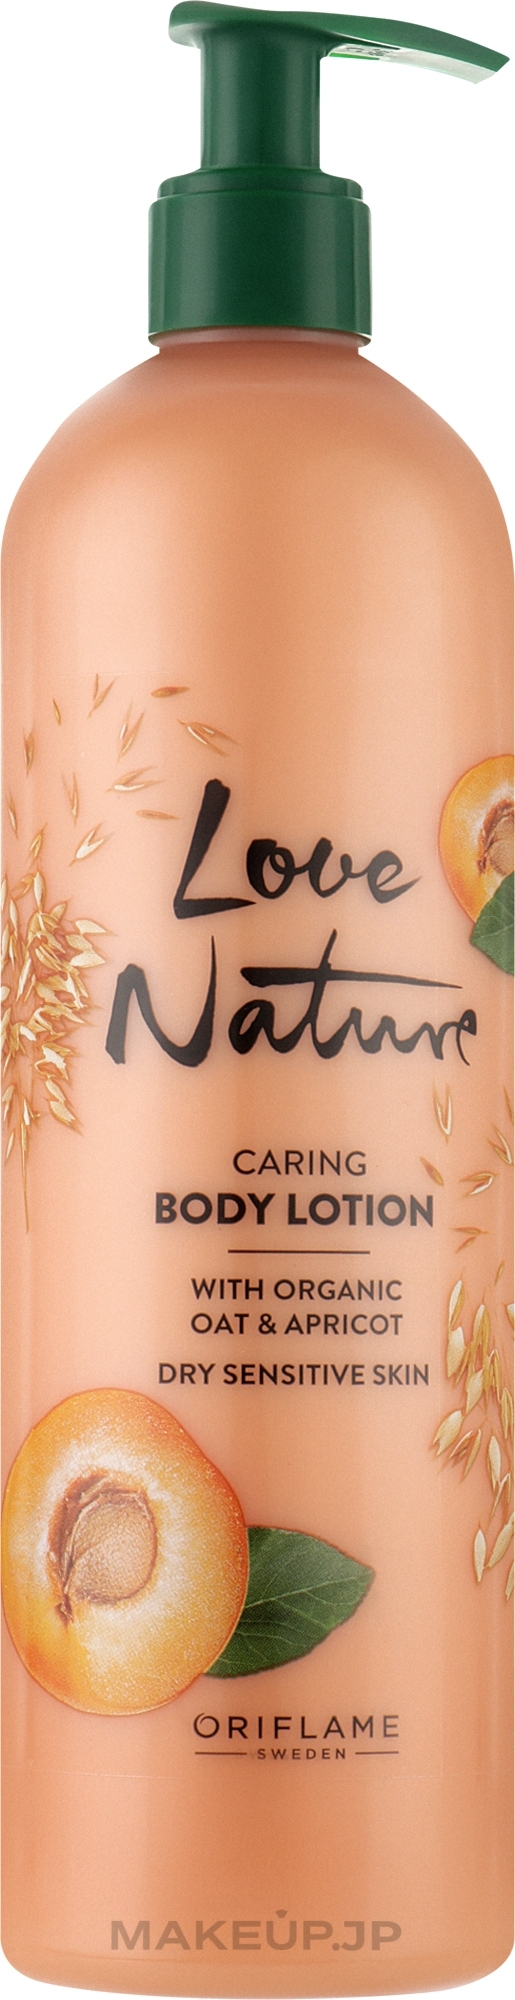 Body Lotion "Oat & Apricot" - Oriflame Love Nature Caring Body Lotion — photo 500 ml